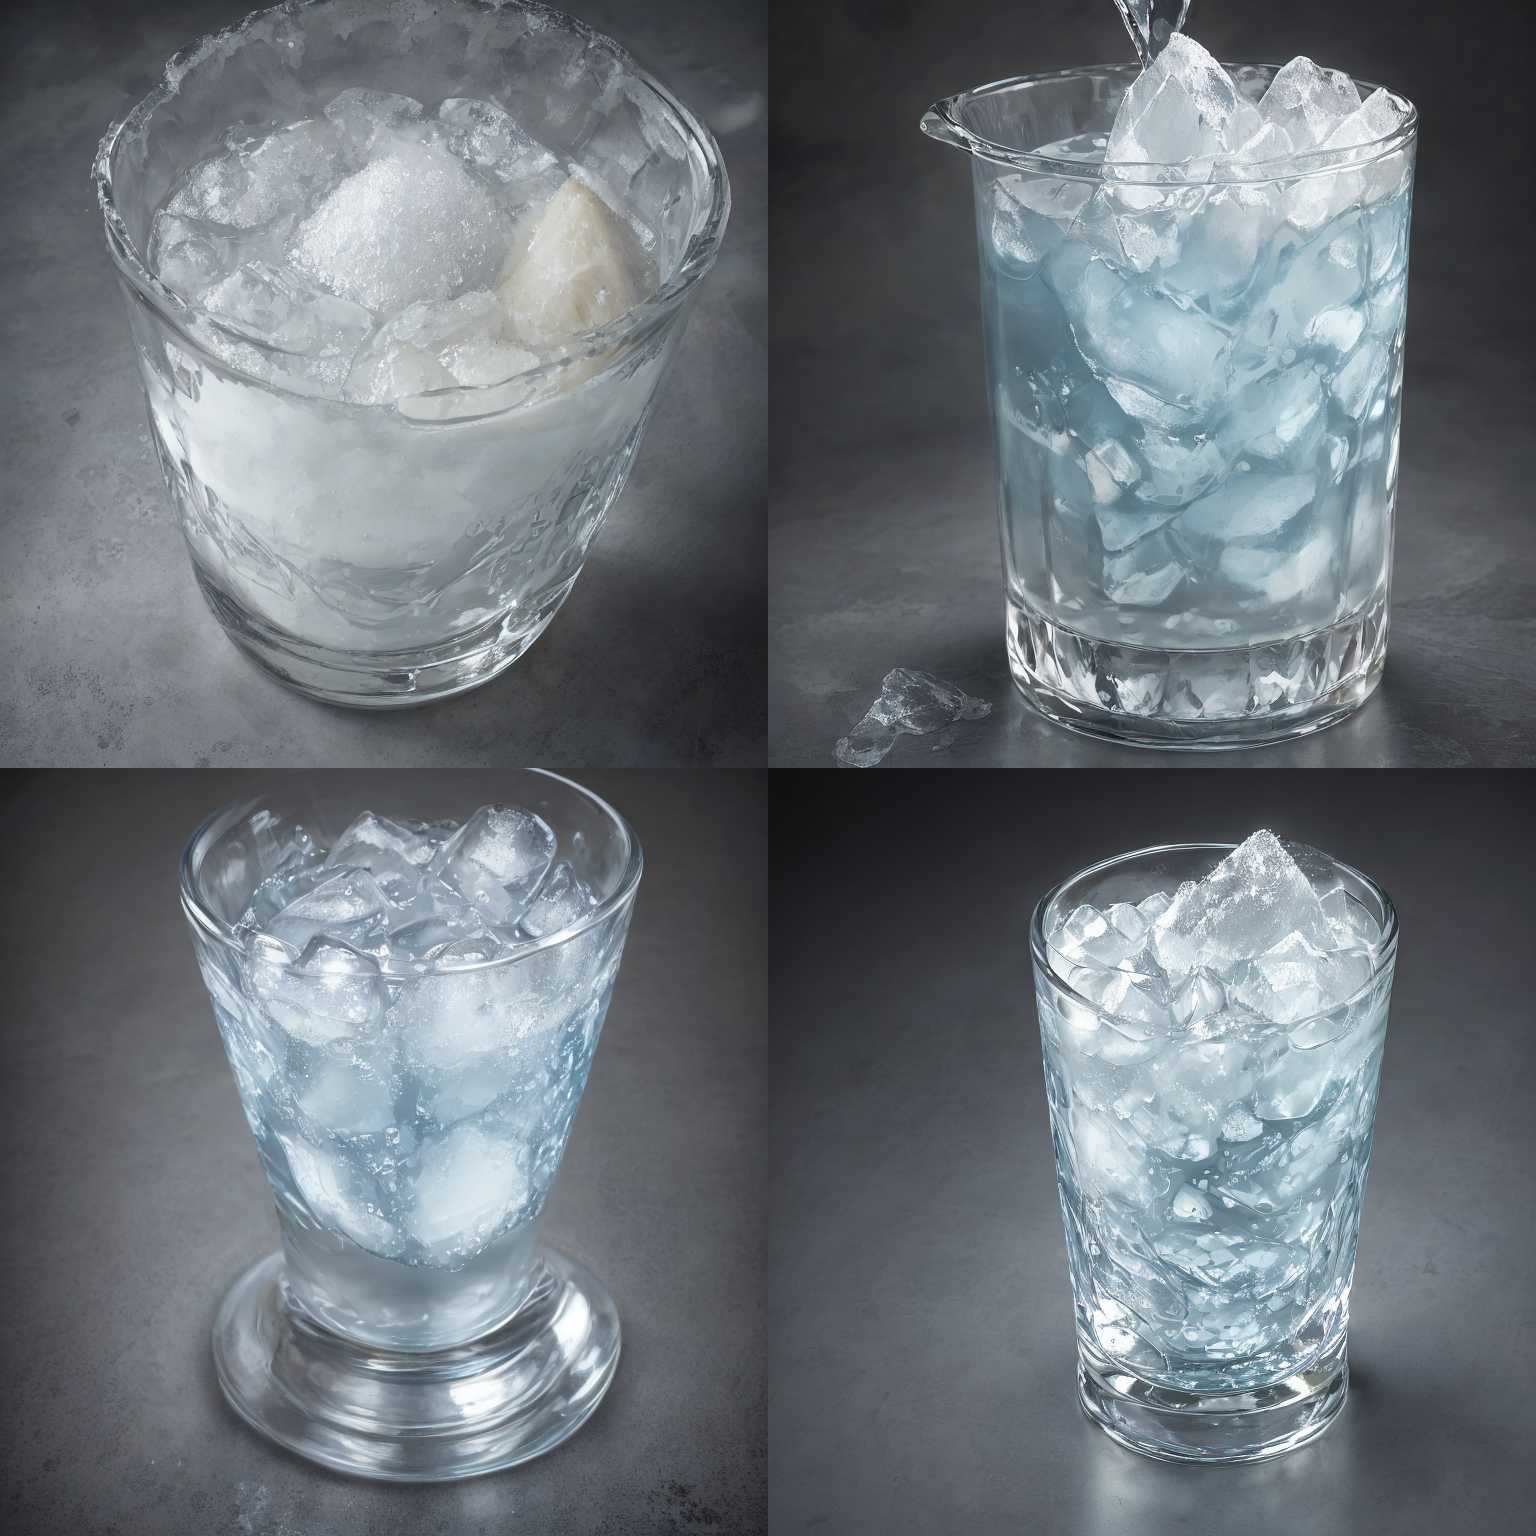 A glass of water mixed with sugar